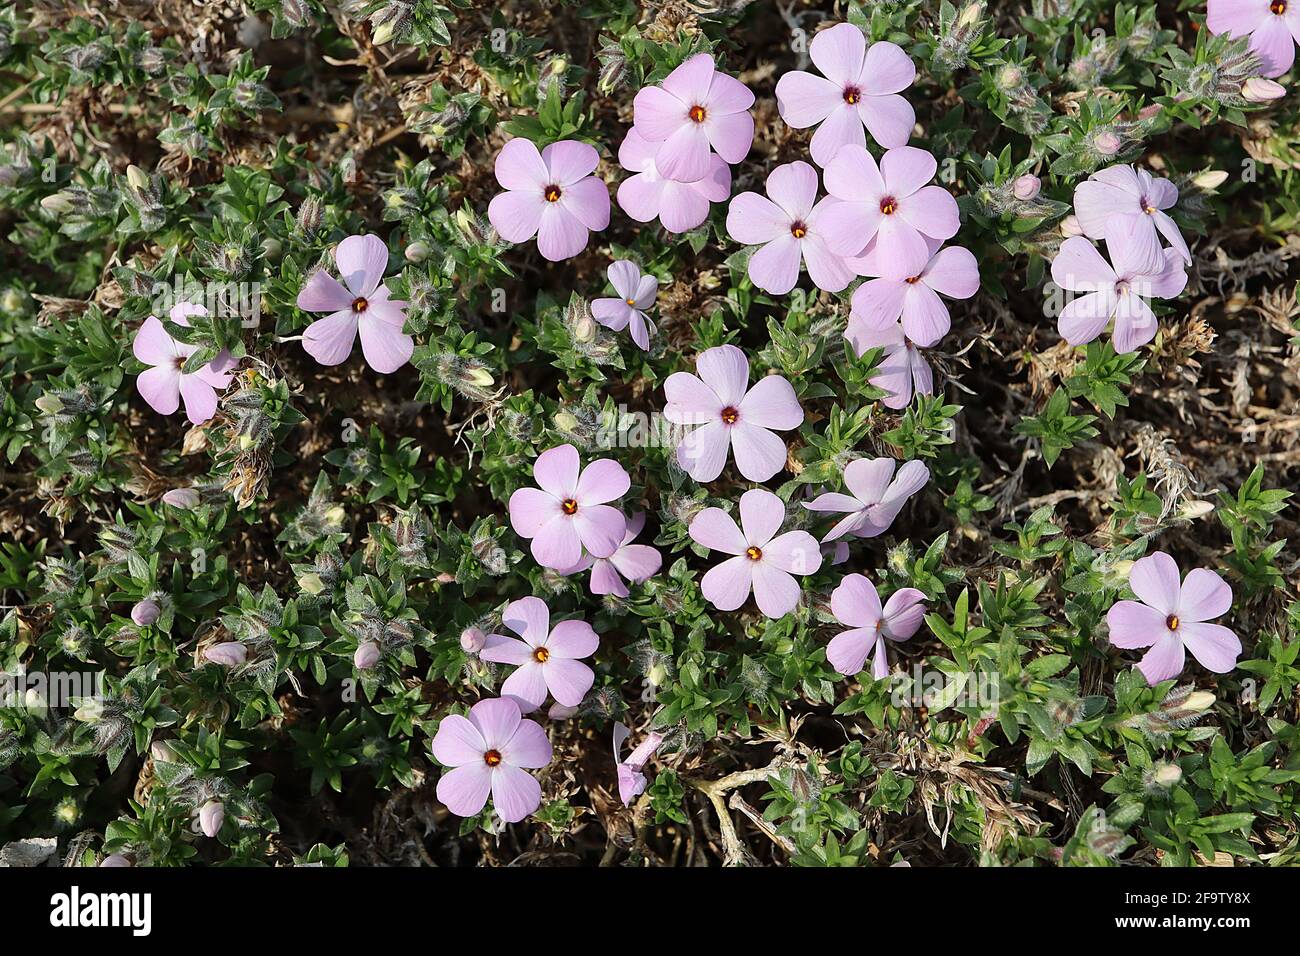 Phlox douglasii ‘Rosea’ / ‘Rose Queen’ Creeping phlox Rose Queen – pale pink flowers with rounded petals,  April, England, UK Stock Photo